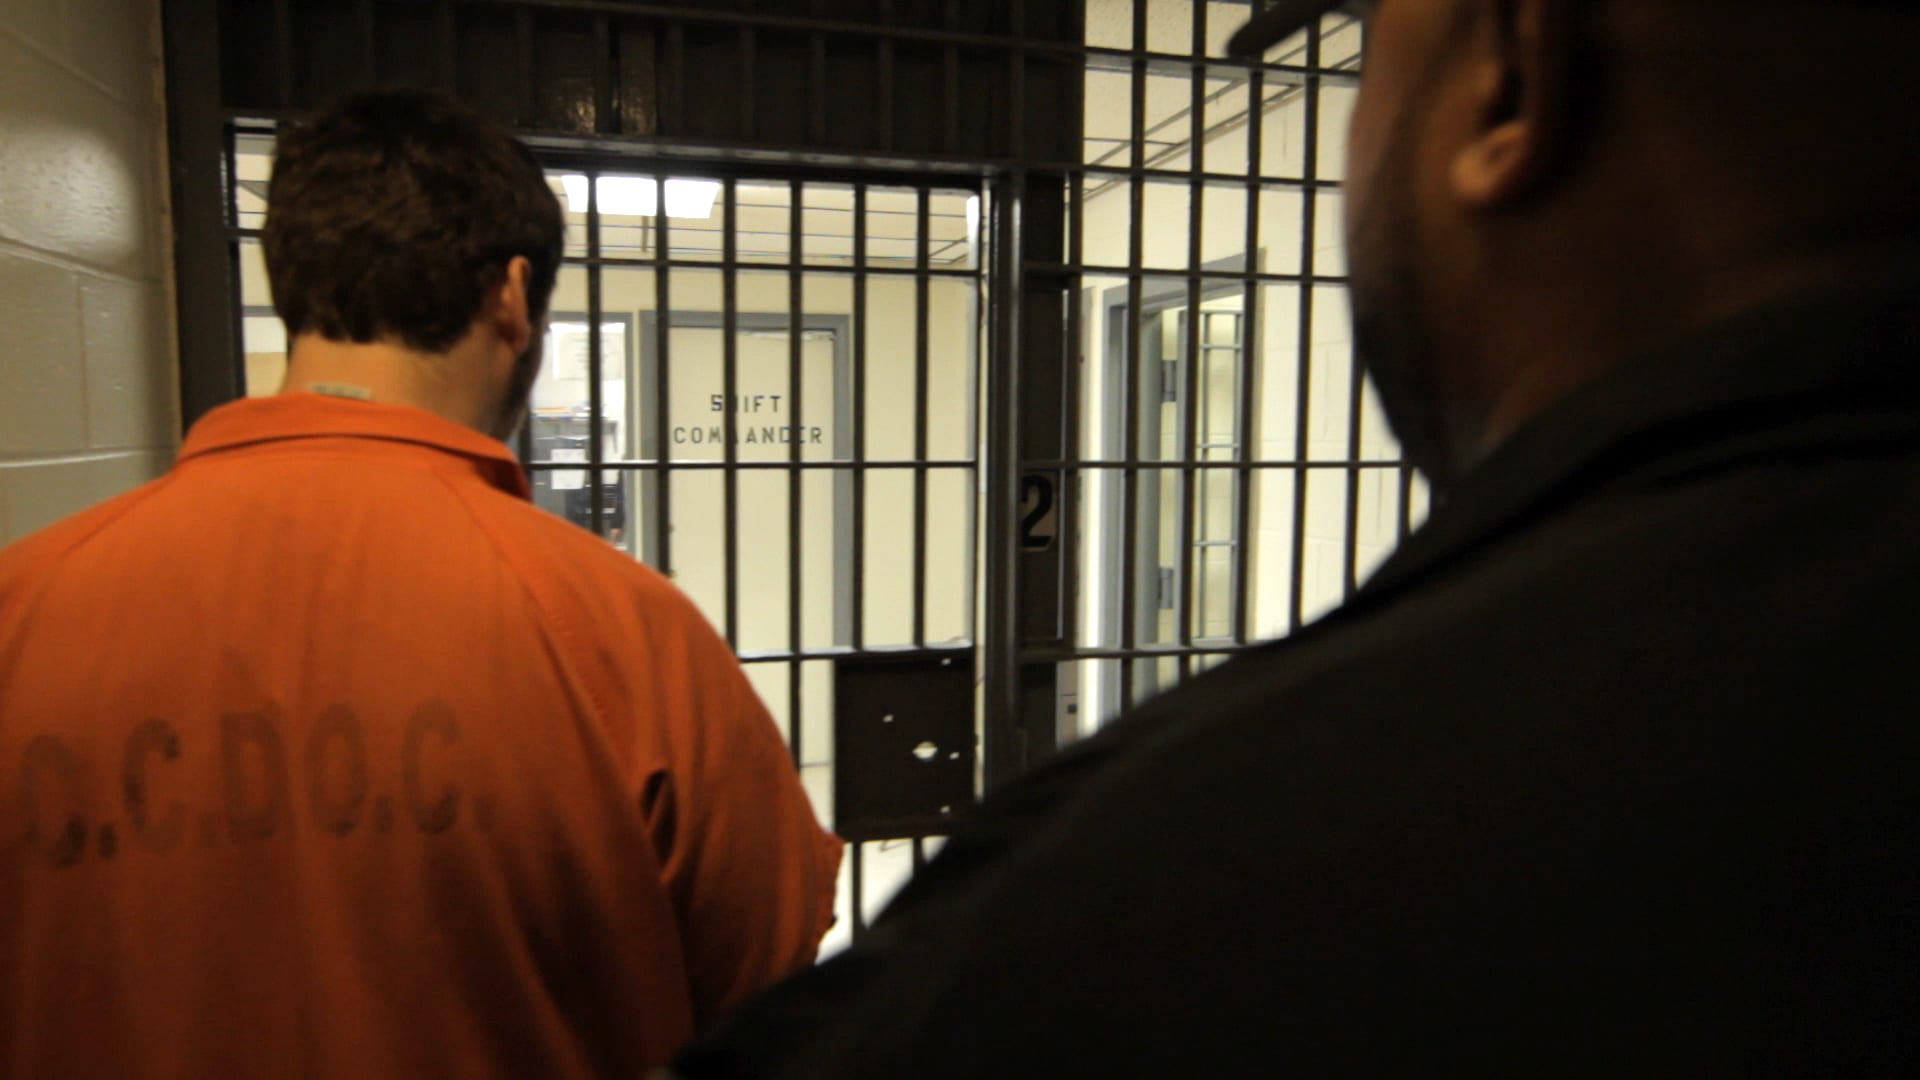 The Impact of Mass Incarceration on Indiana’s Youth